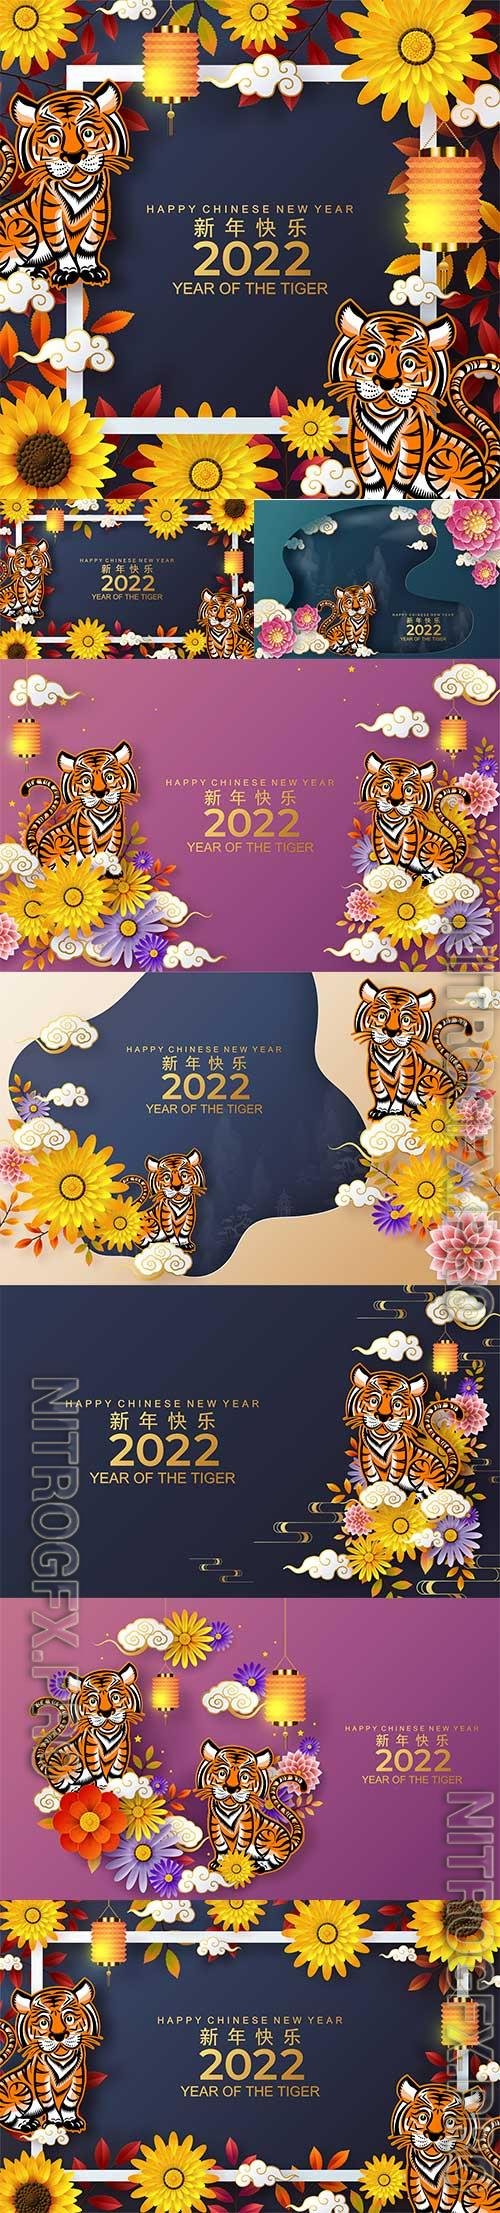 New year 2022 year of the tiger red and gold flower in vector